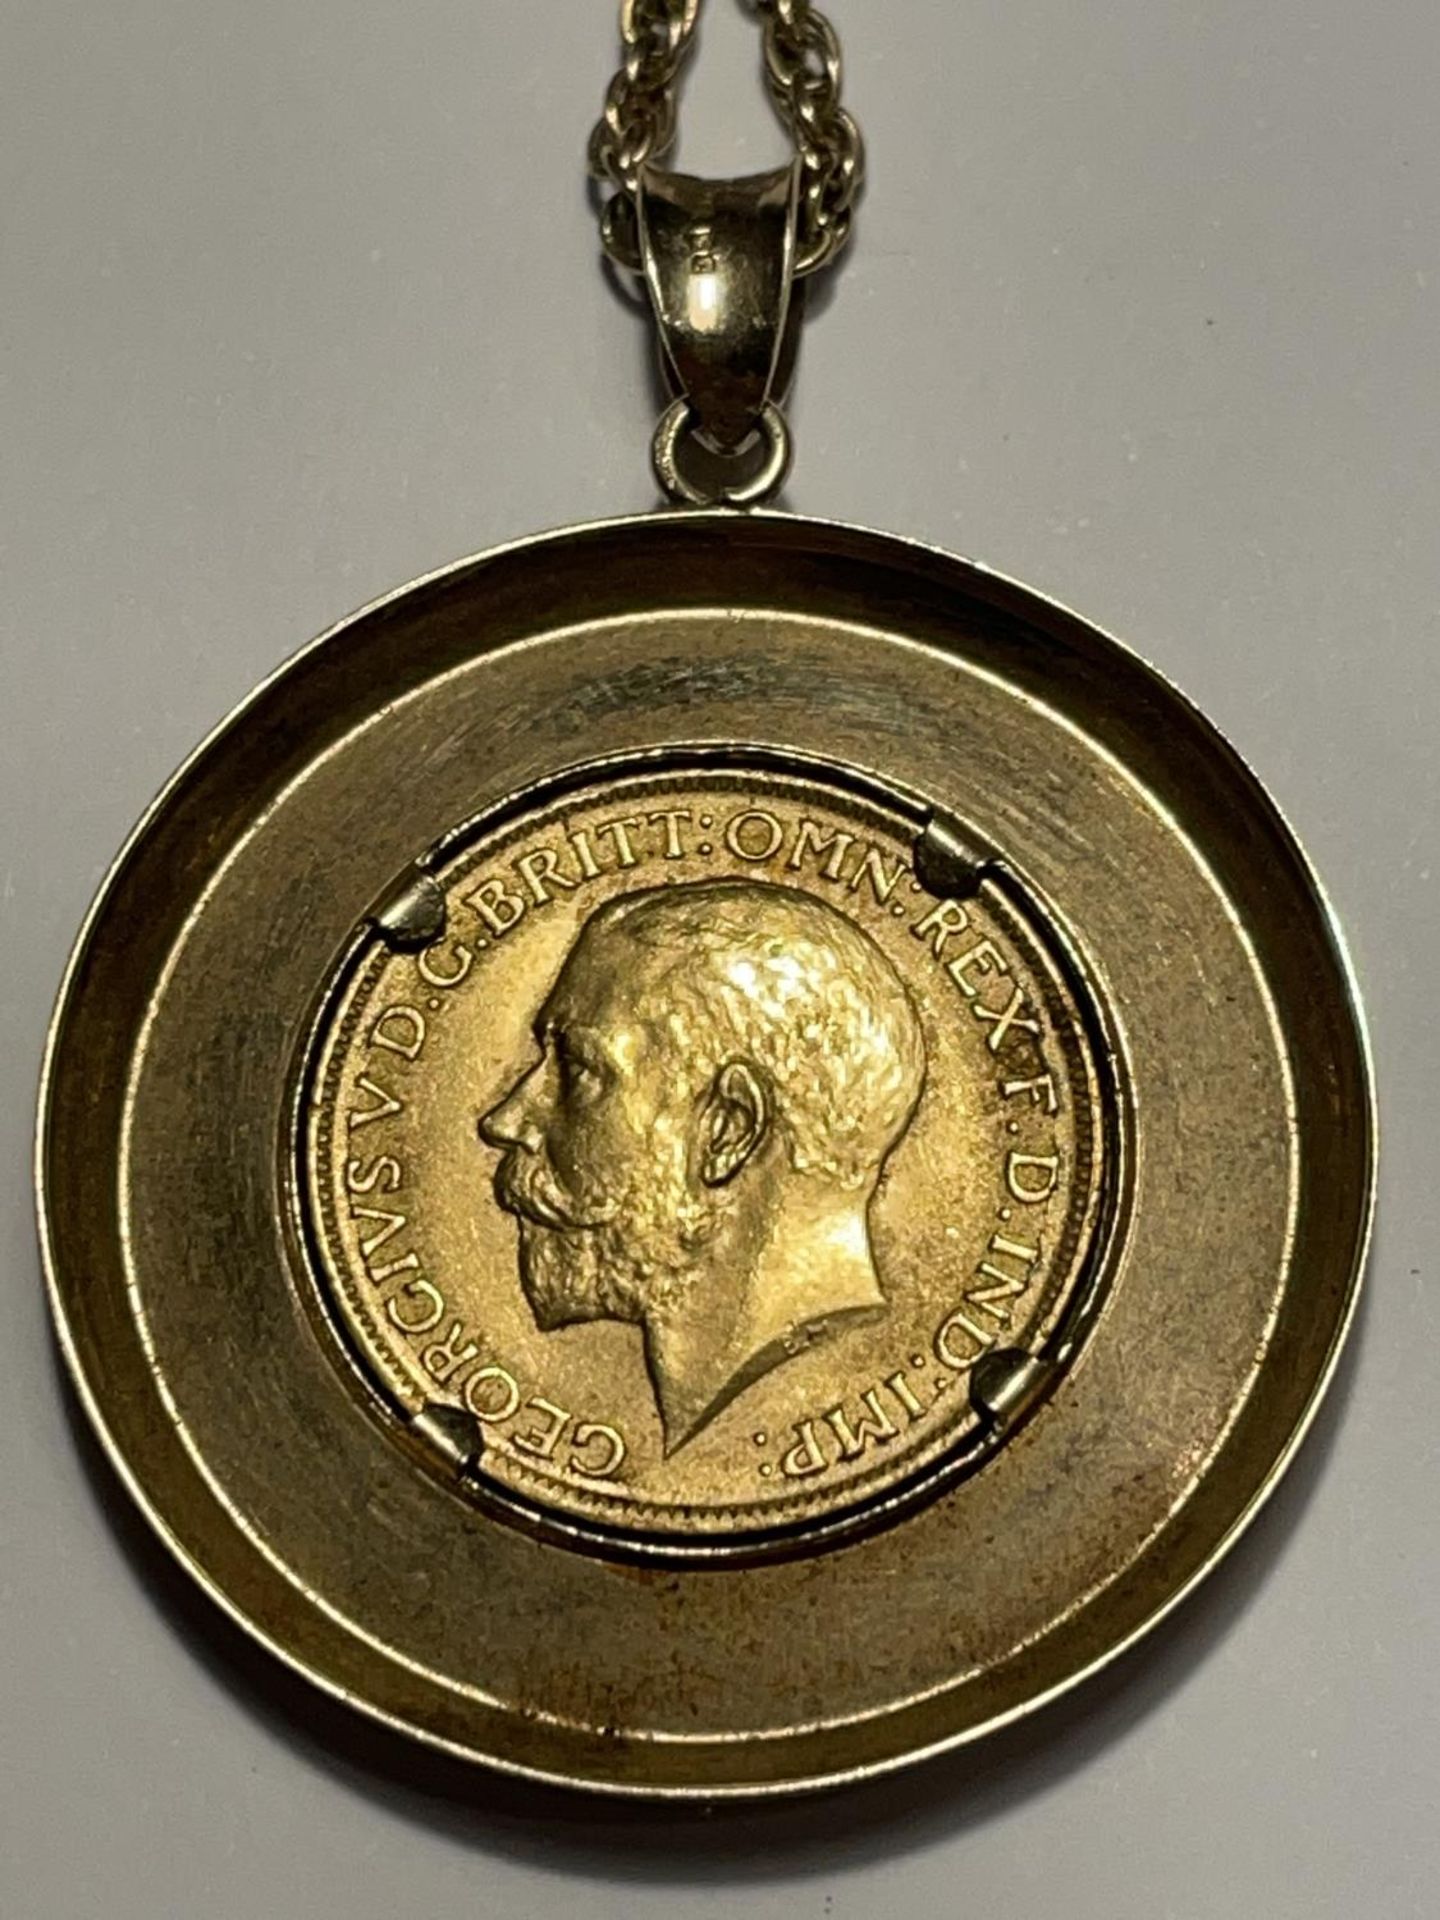 A 1915 GOLD SOVEREIGN IN A 9 CARAT GOLD MOUNT WITH A 9 CARAT GOLD CHAIN GROSS WEIGHT 19.78 GRAMS - Image 4 of 6